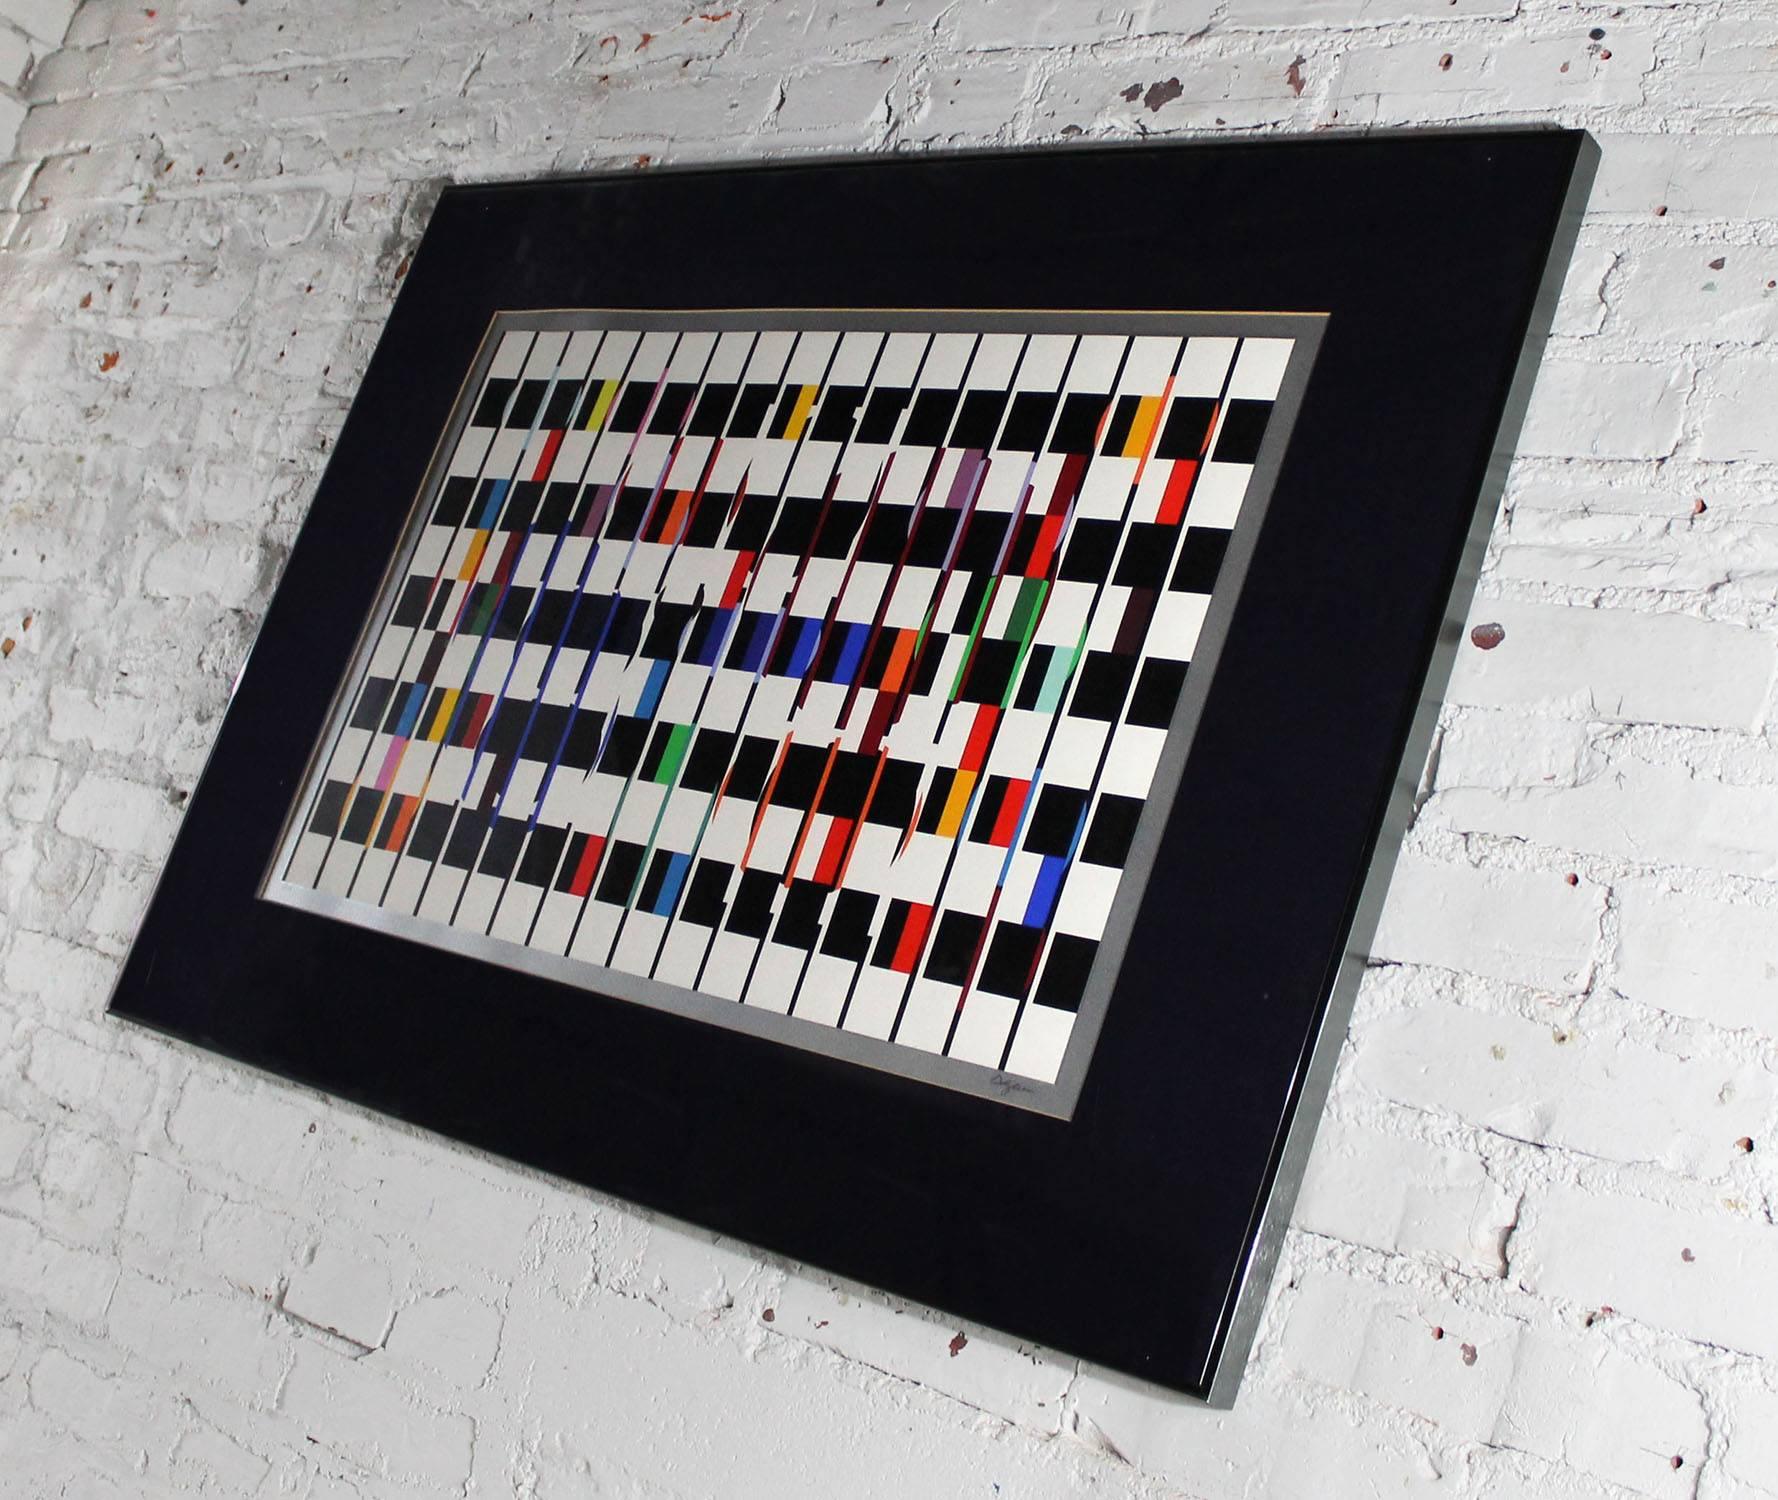 Kinetic Yaacov Agam Serigraph One and Another No. 2 Signed and Marked E.A.